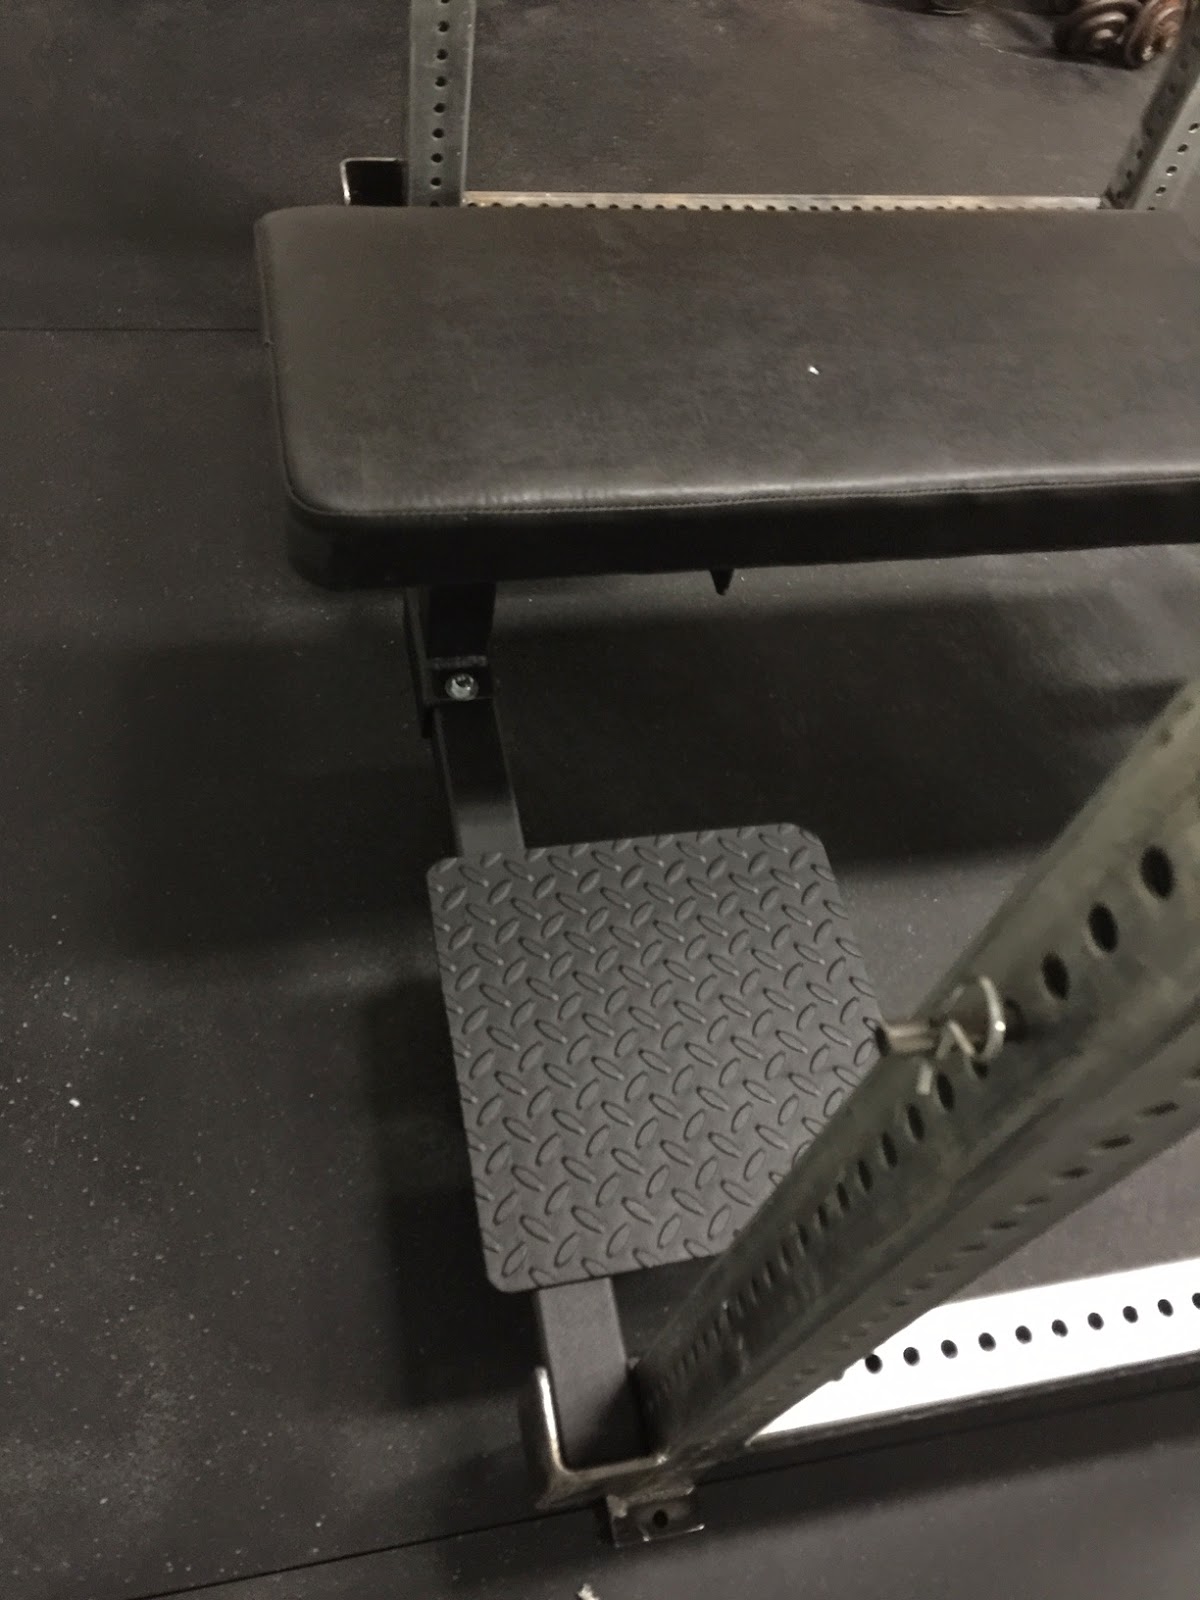 Lakeville Powerlifting: Bench and Power Rack arrive from Texas Strength ...